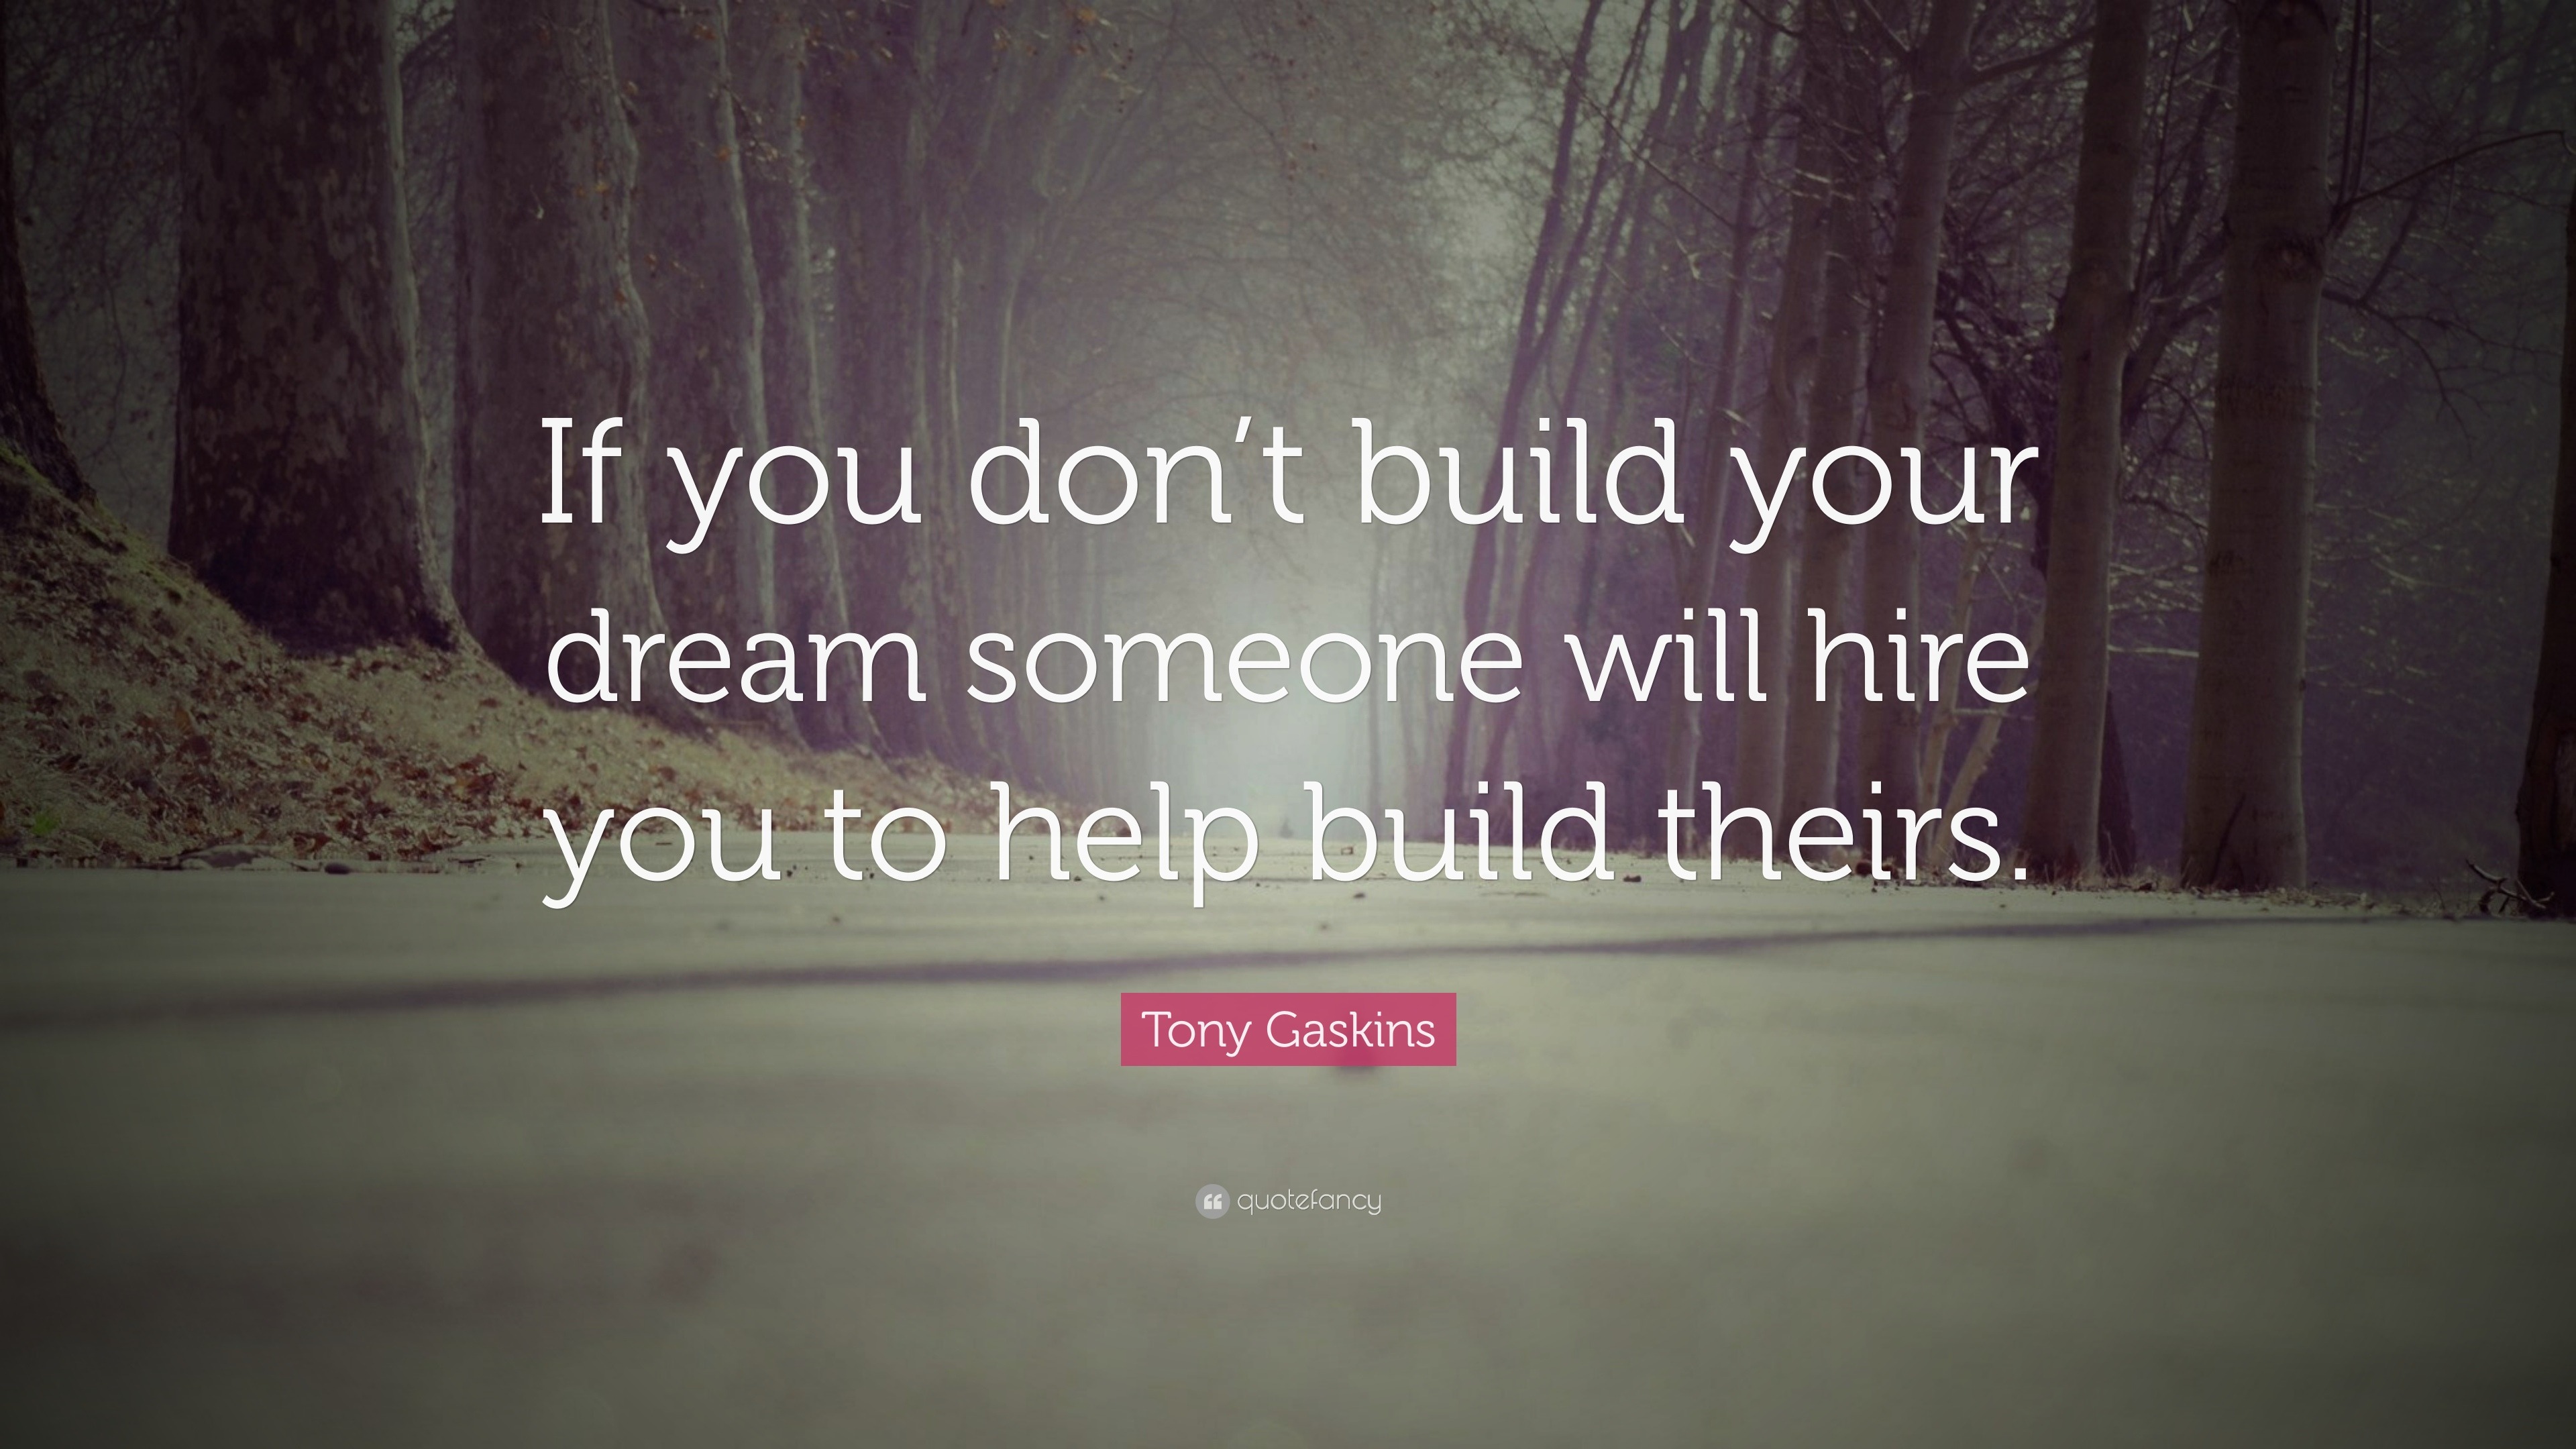 Tony Gaskins Quote: "If you don't build your dream someone will hire you to help build theirs ...